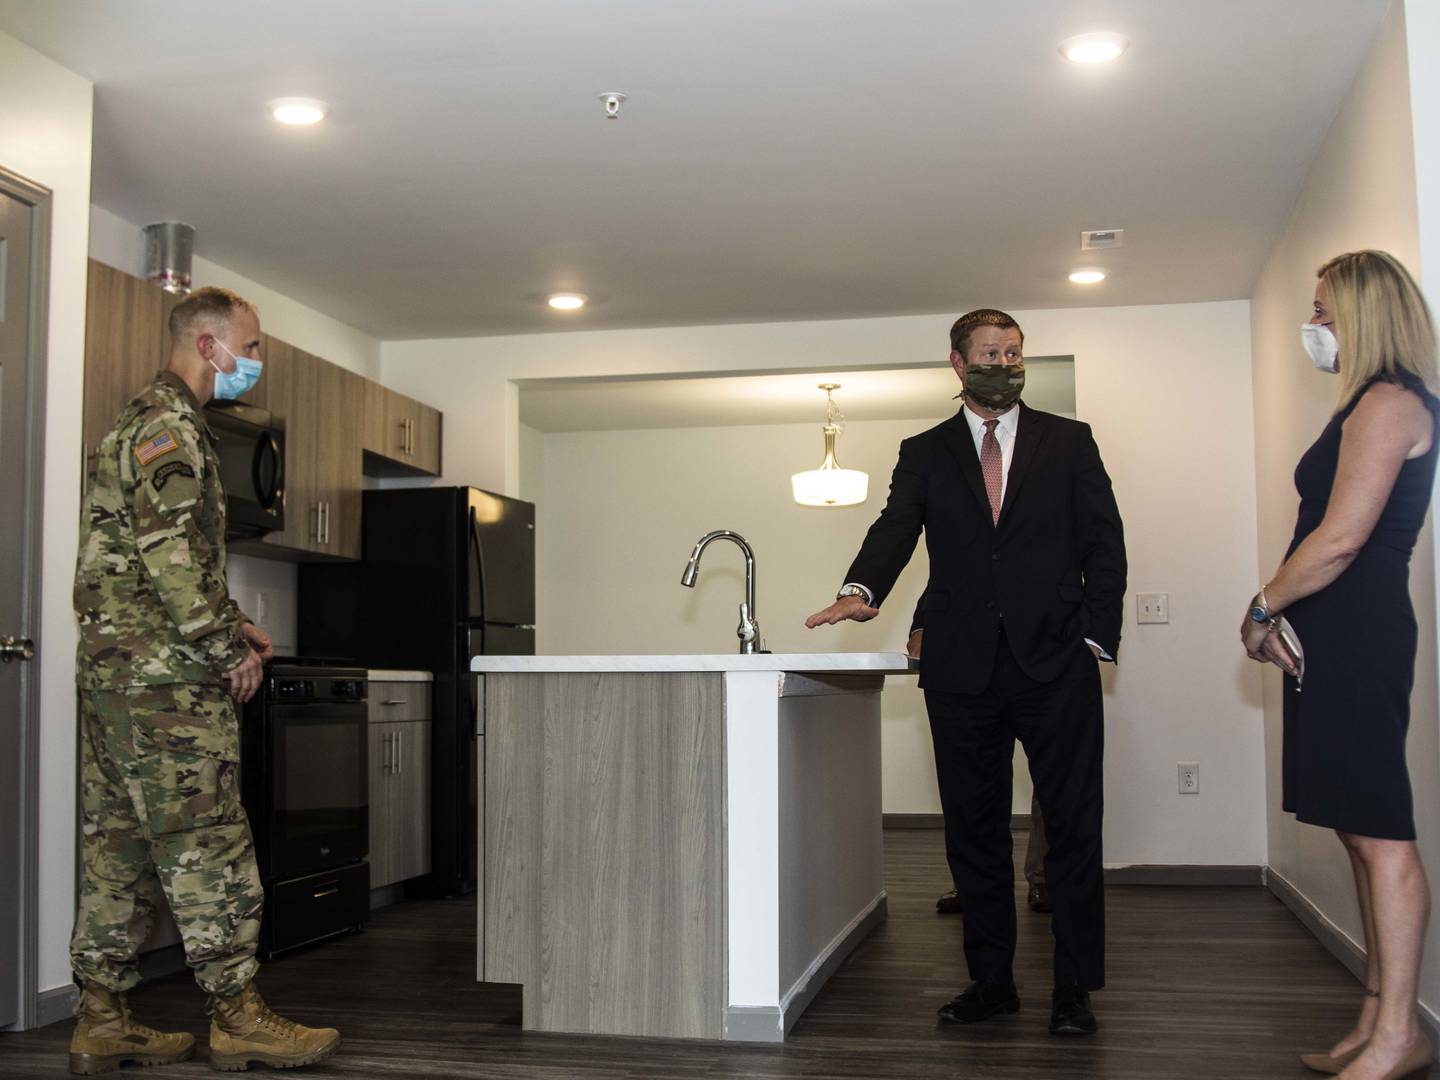 Then-Secretary of the Army Ryan D. McCarthy, center, conducts a walk through of a newly renovated house on Fort Bragg, N.C., Sept. 2, 2020.